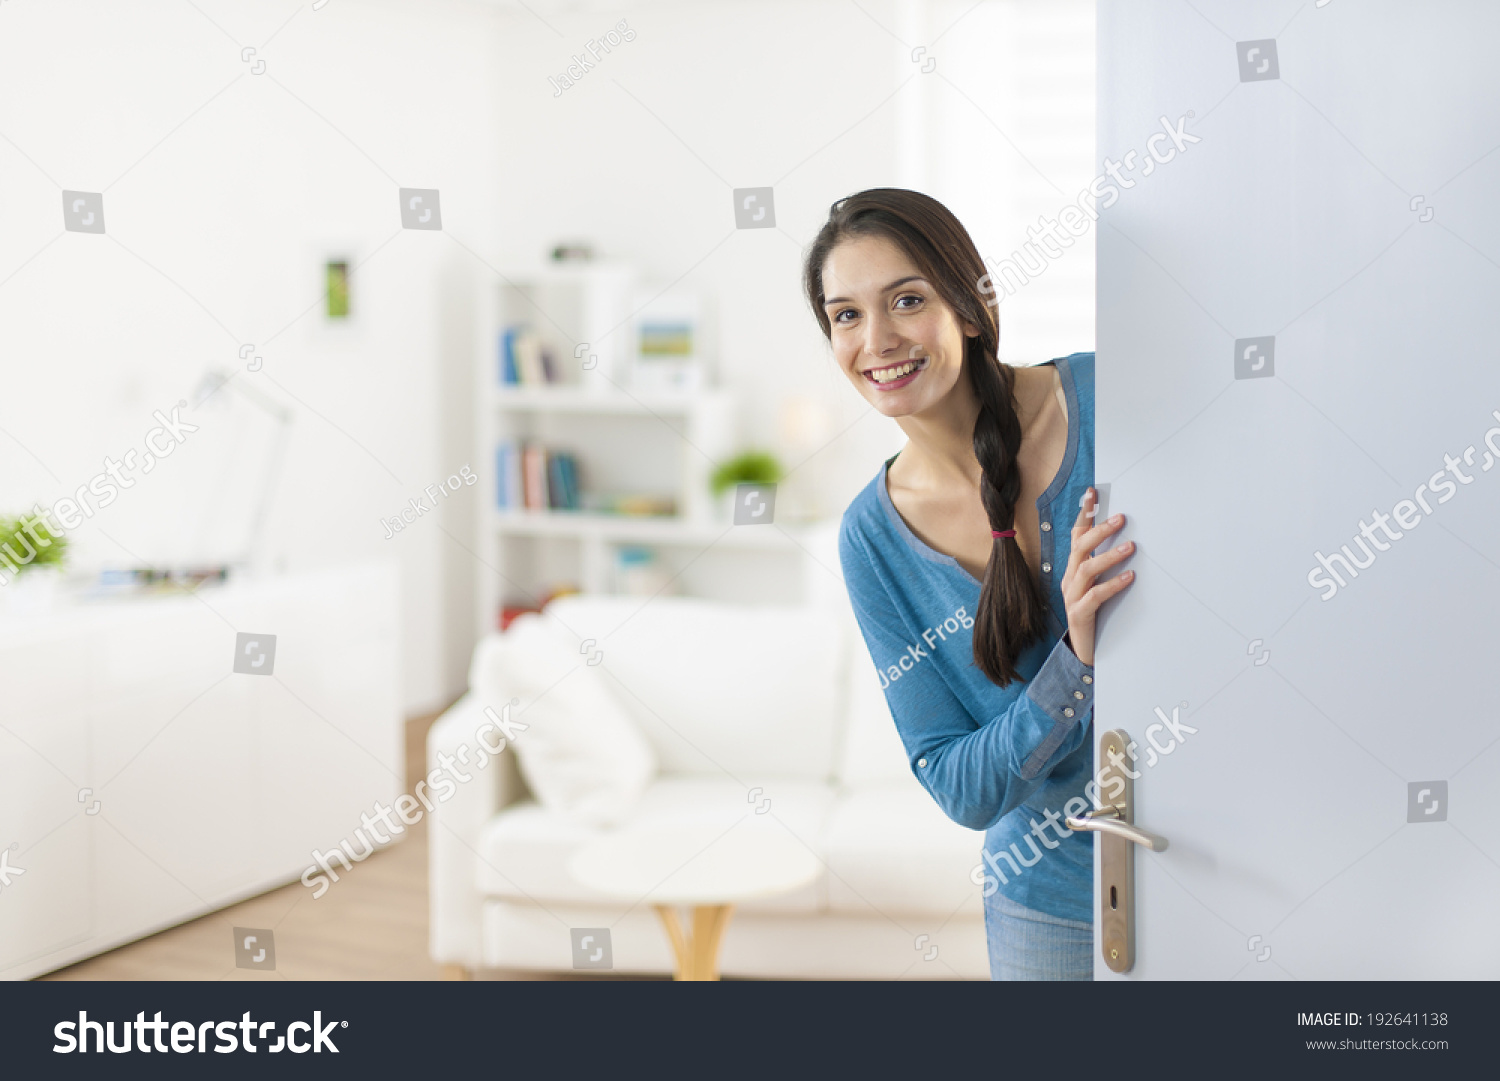 Cheerful woman inviting people to enter in home #192641138